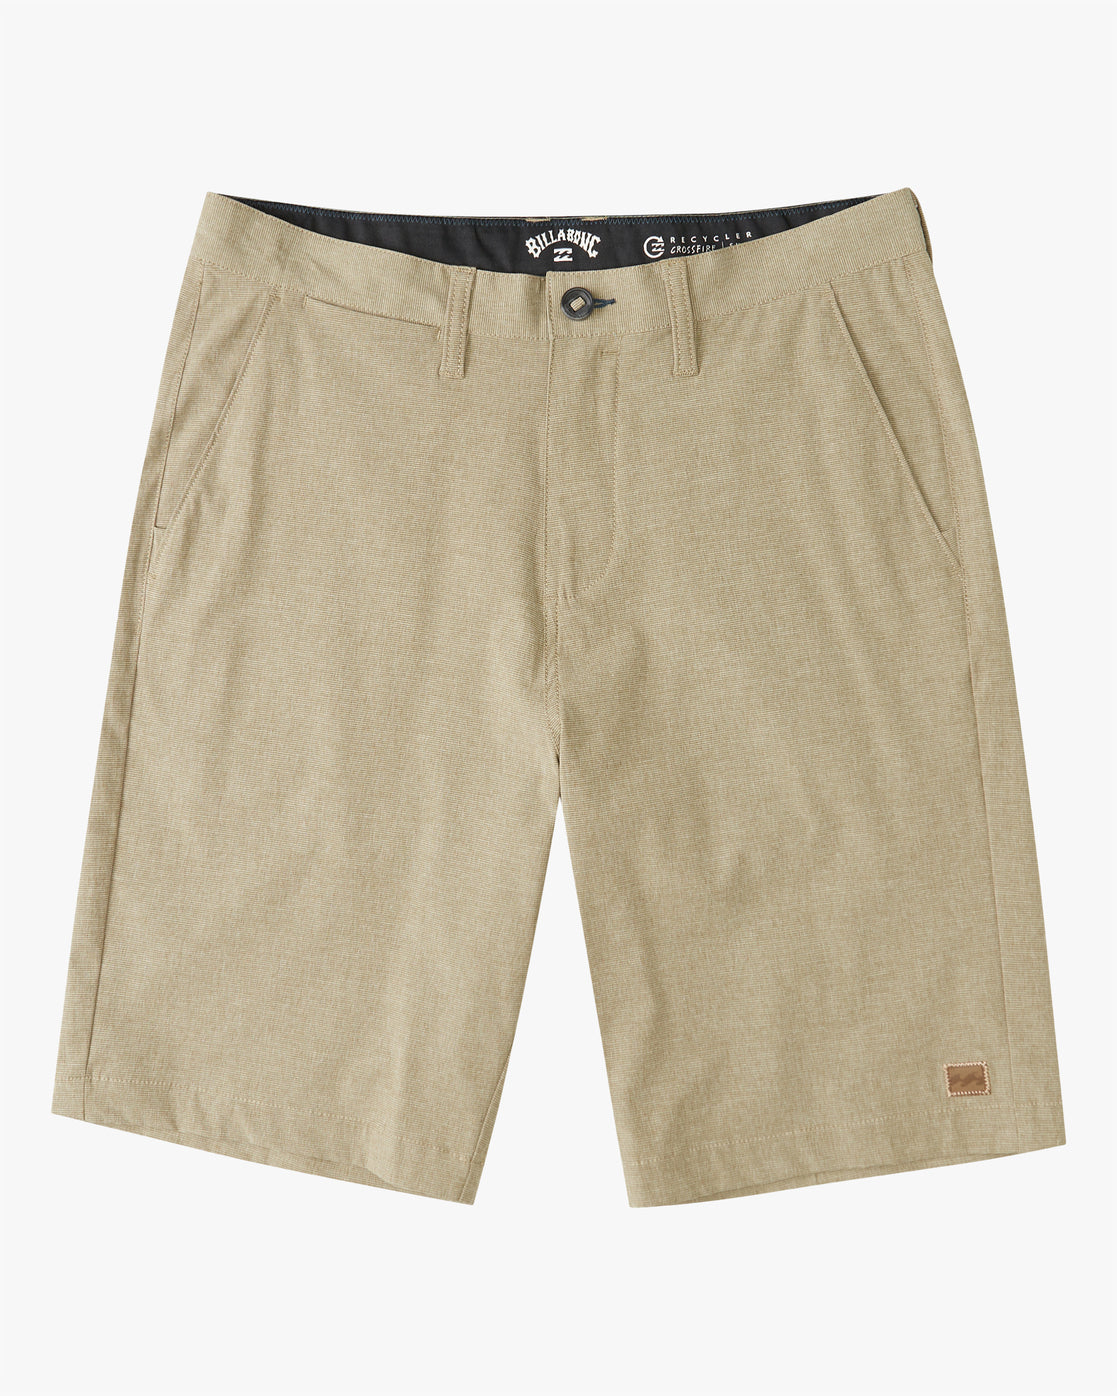 Crossfire Submersible Shorts 21" - ABYWS00188